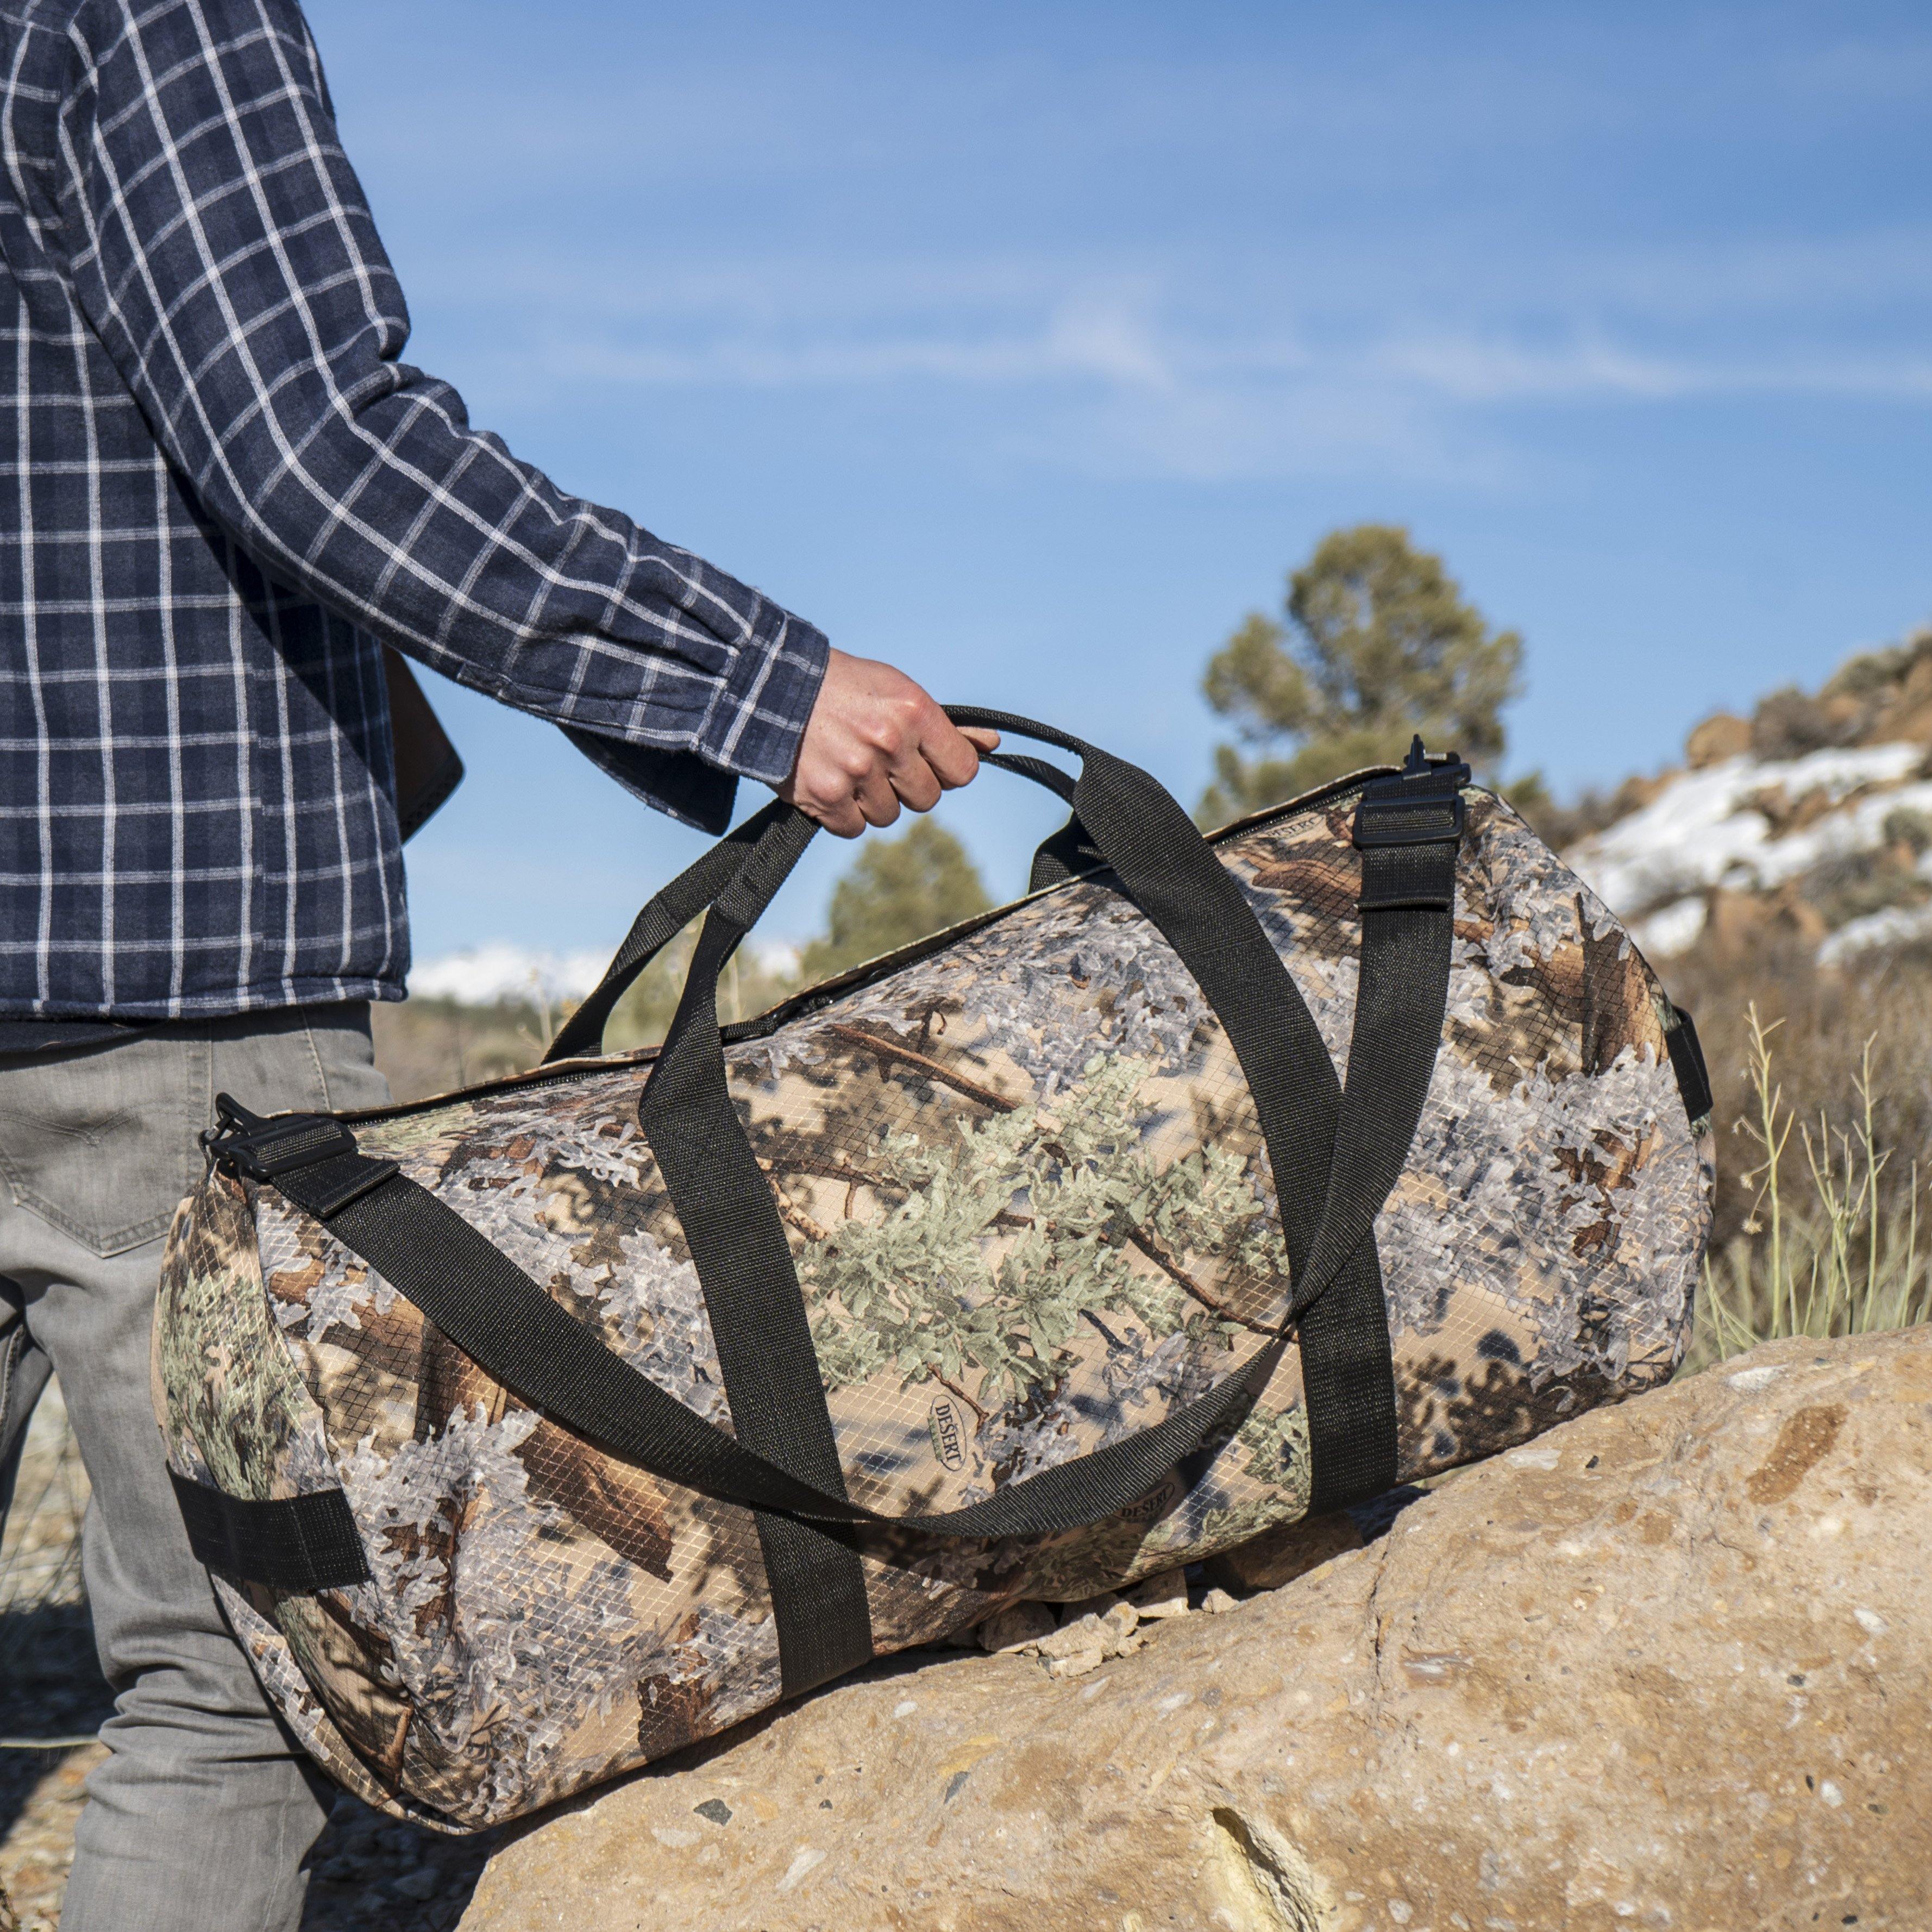 Lifestyle photo of King's Camo Desert Shadow print SD1430DLX Standard Duffle by Northstar Bags. 75 liter duffel with diamond ripstop fabric, thick webbing straps, and a large format metal zipper. Guaranteed for life.